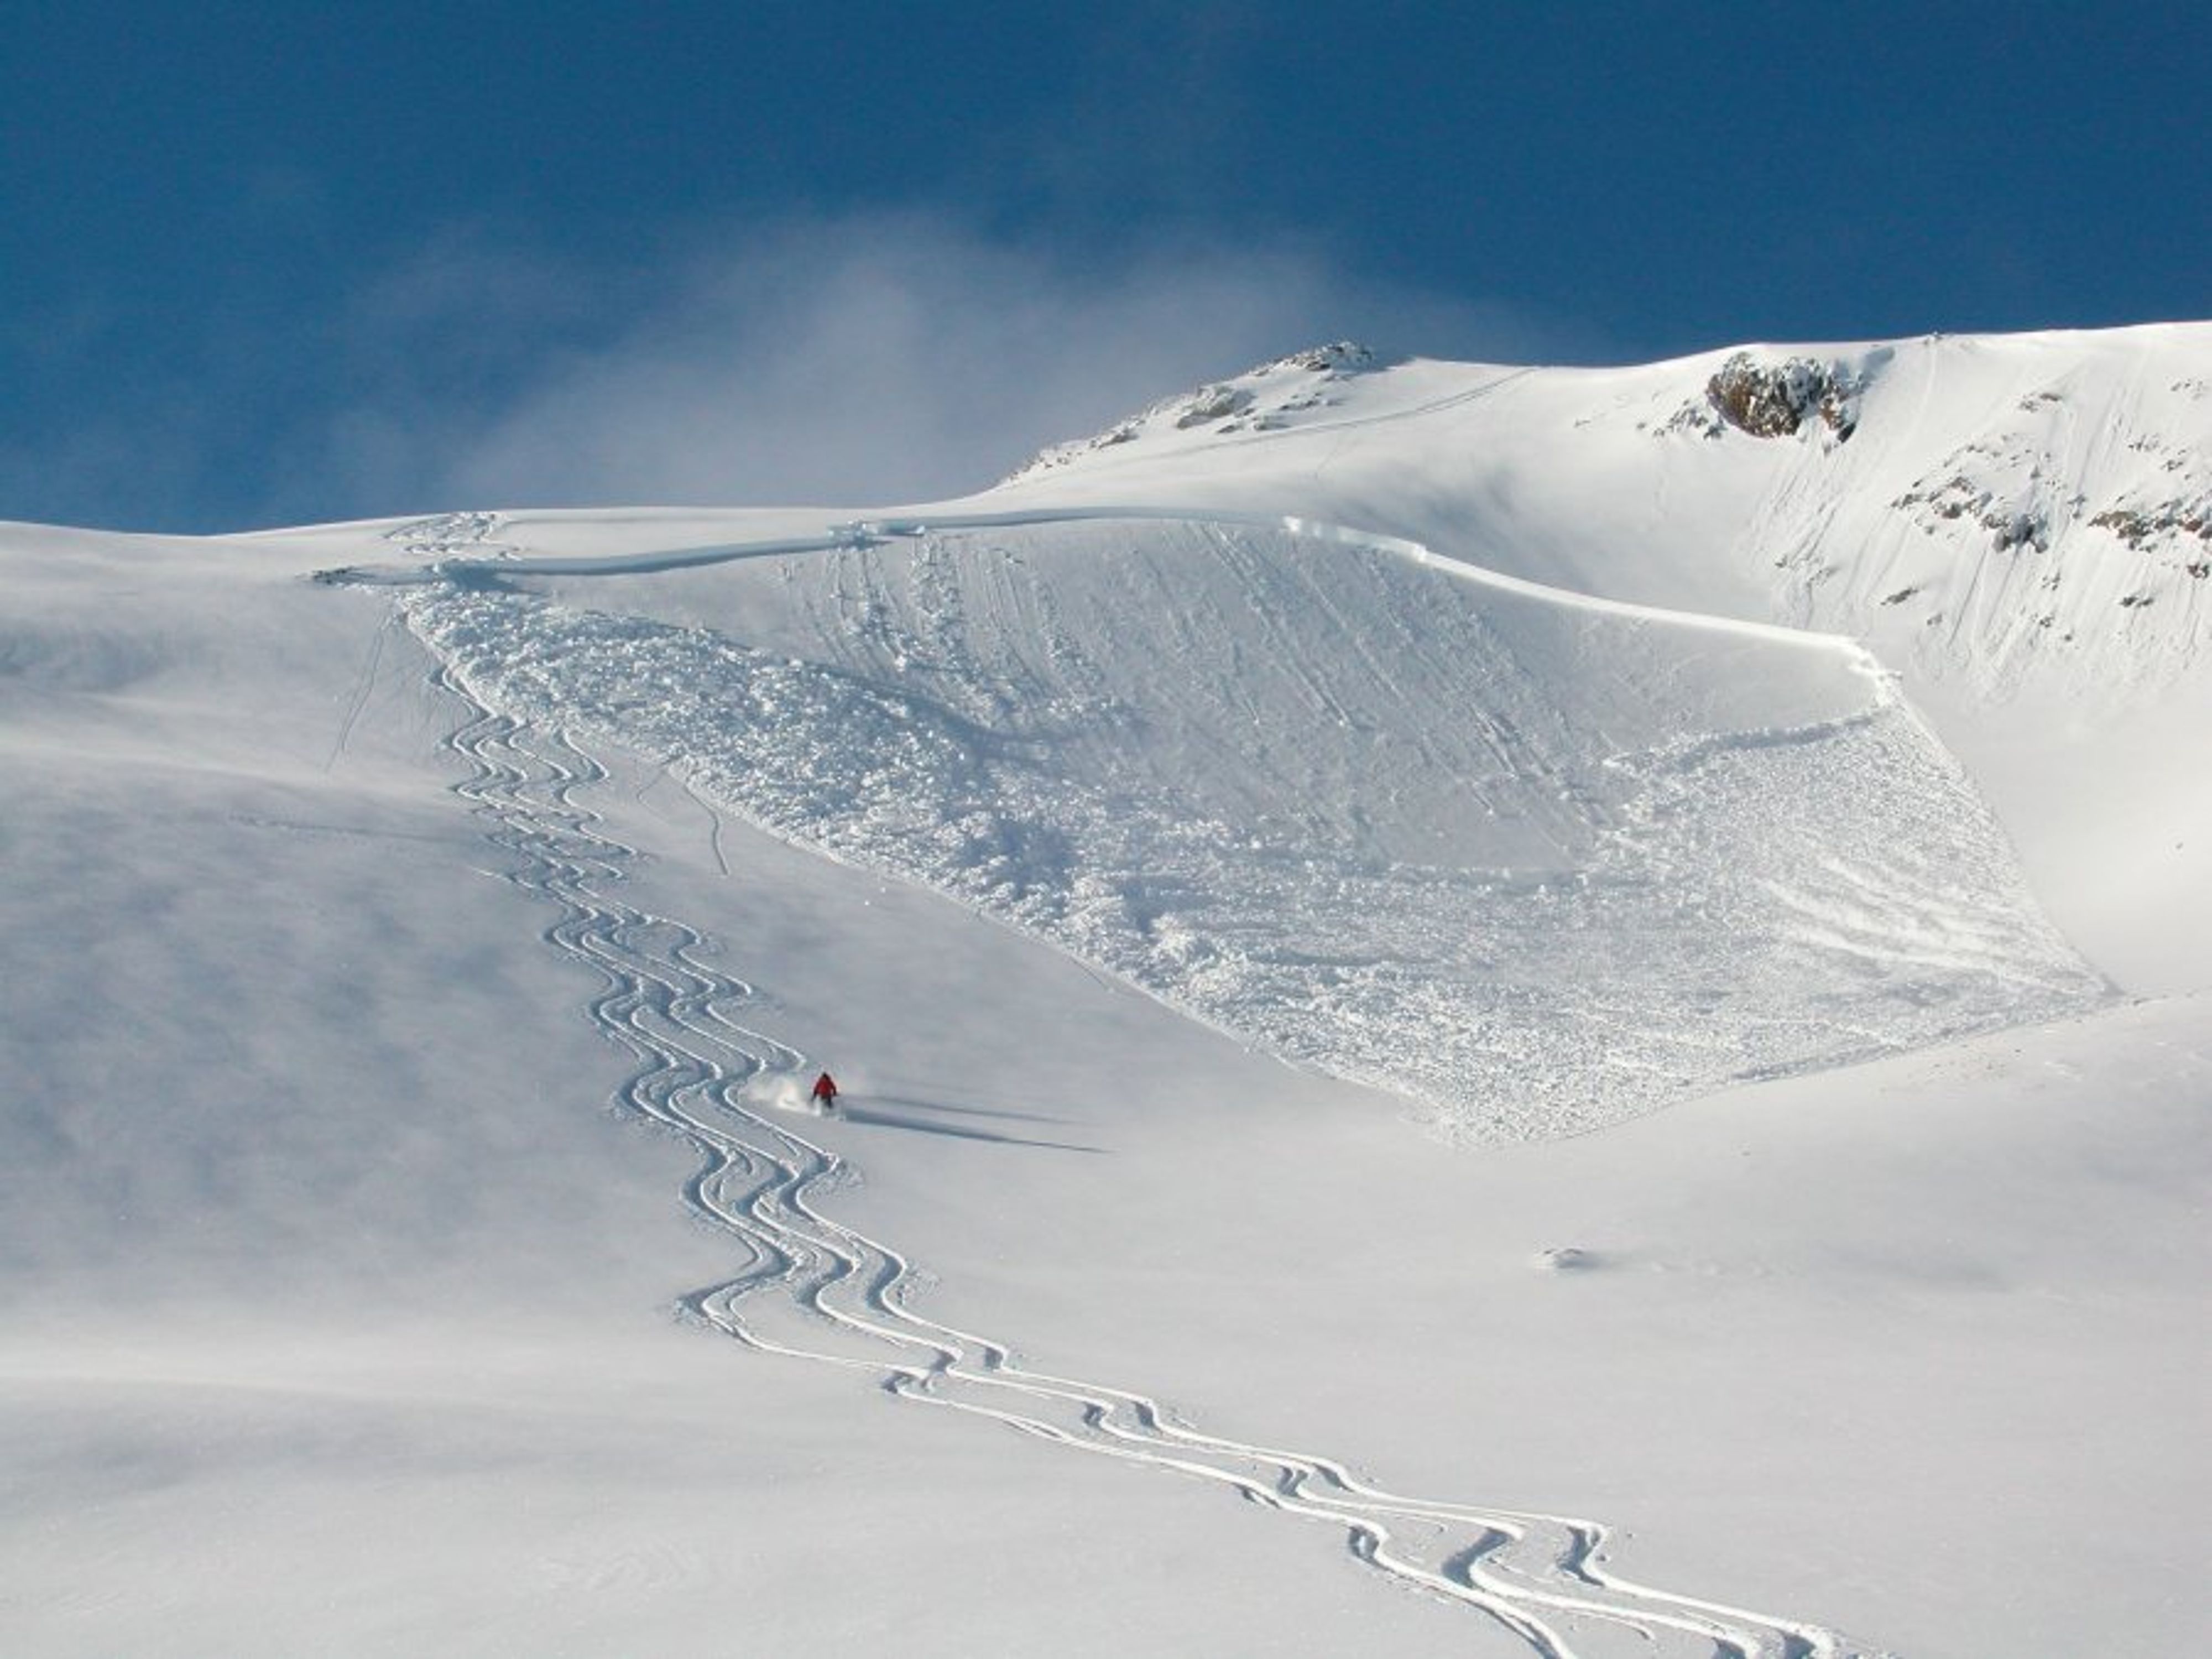 This avalanche was triggered by a skier at the top of a convex roll, where the slope rapidly steepened. Fortunately, no one was caught.